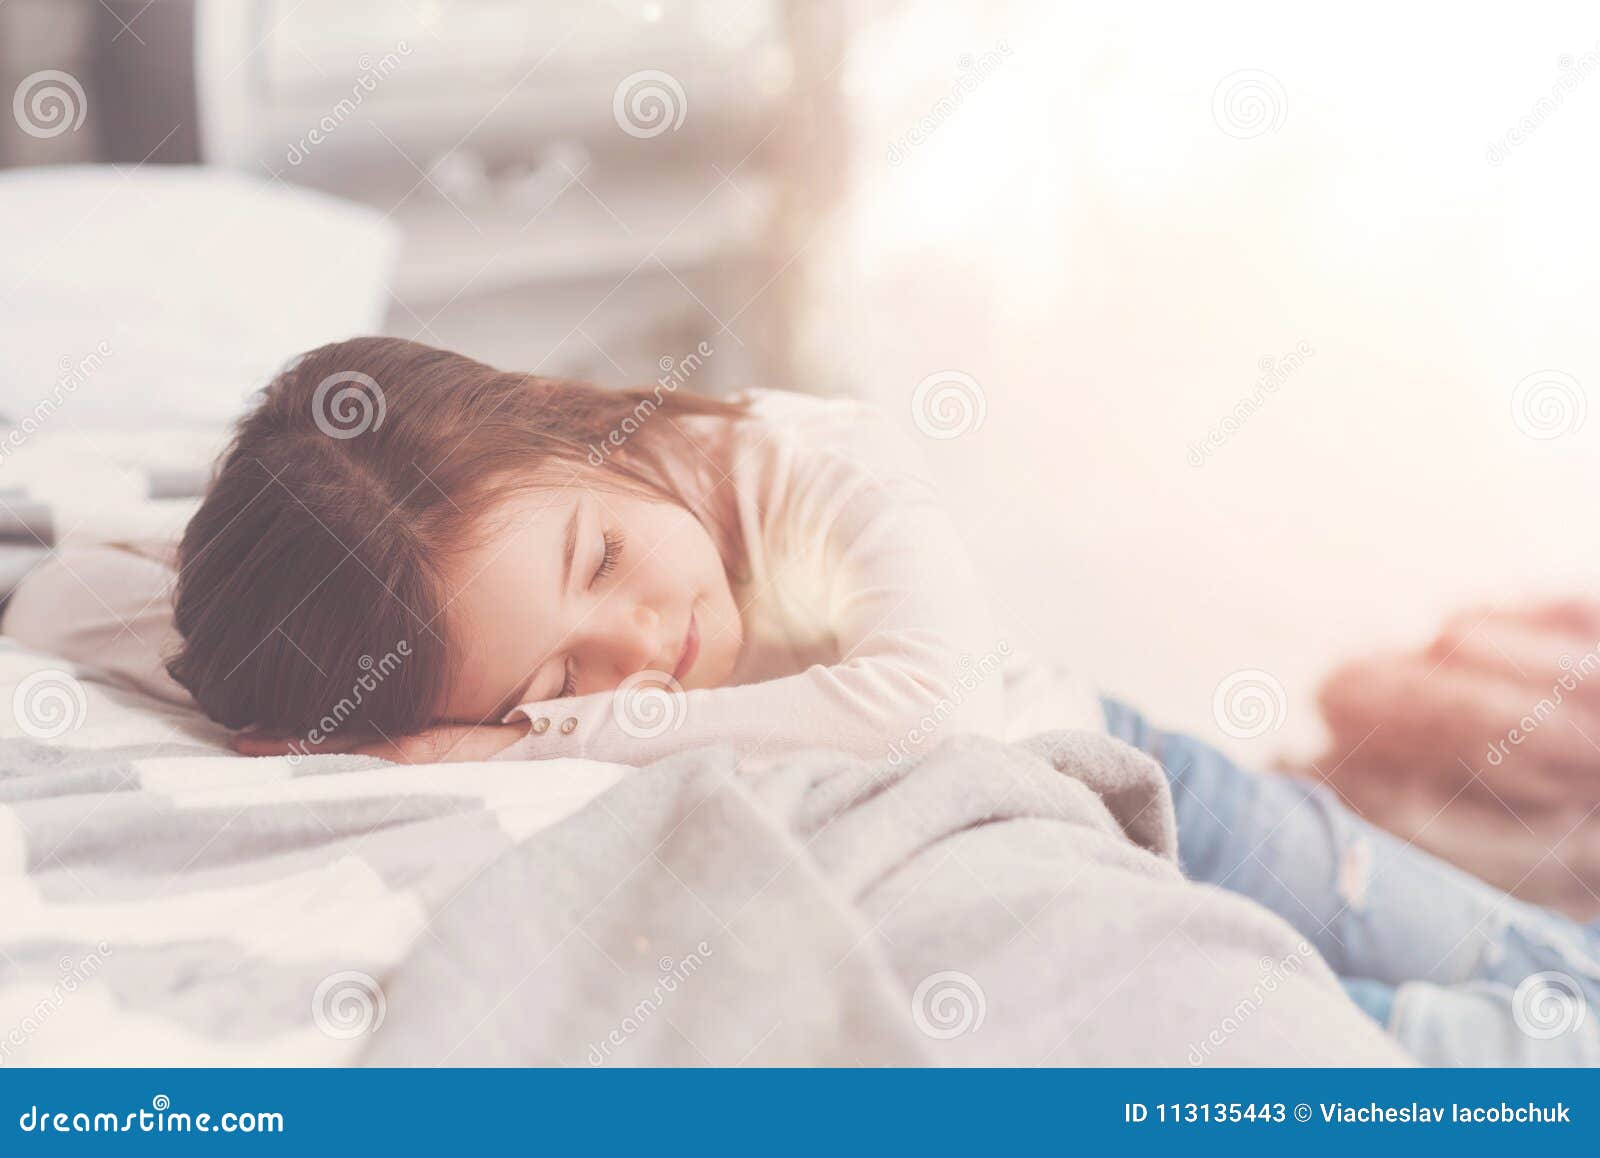 Enchanting Young Child Taking Some Rest Stock Image - Image of quiet ...